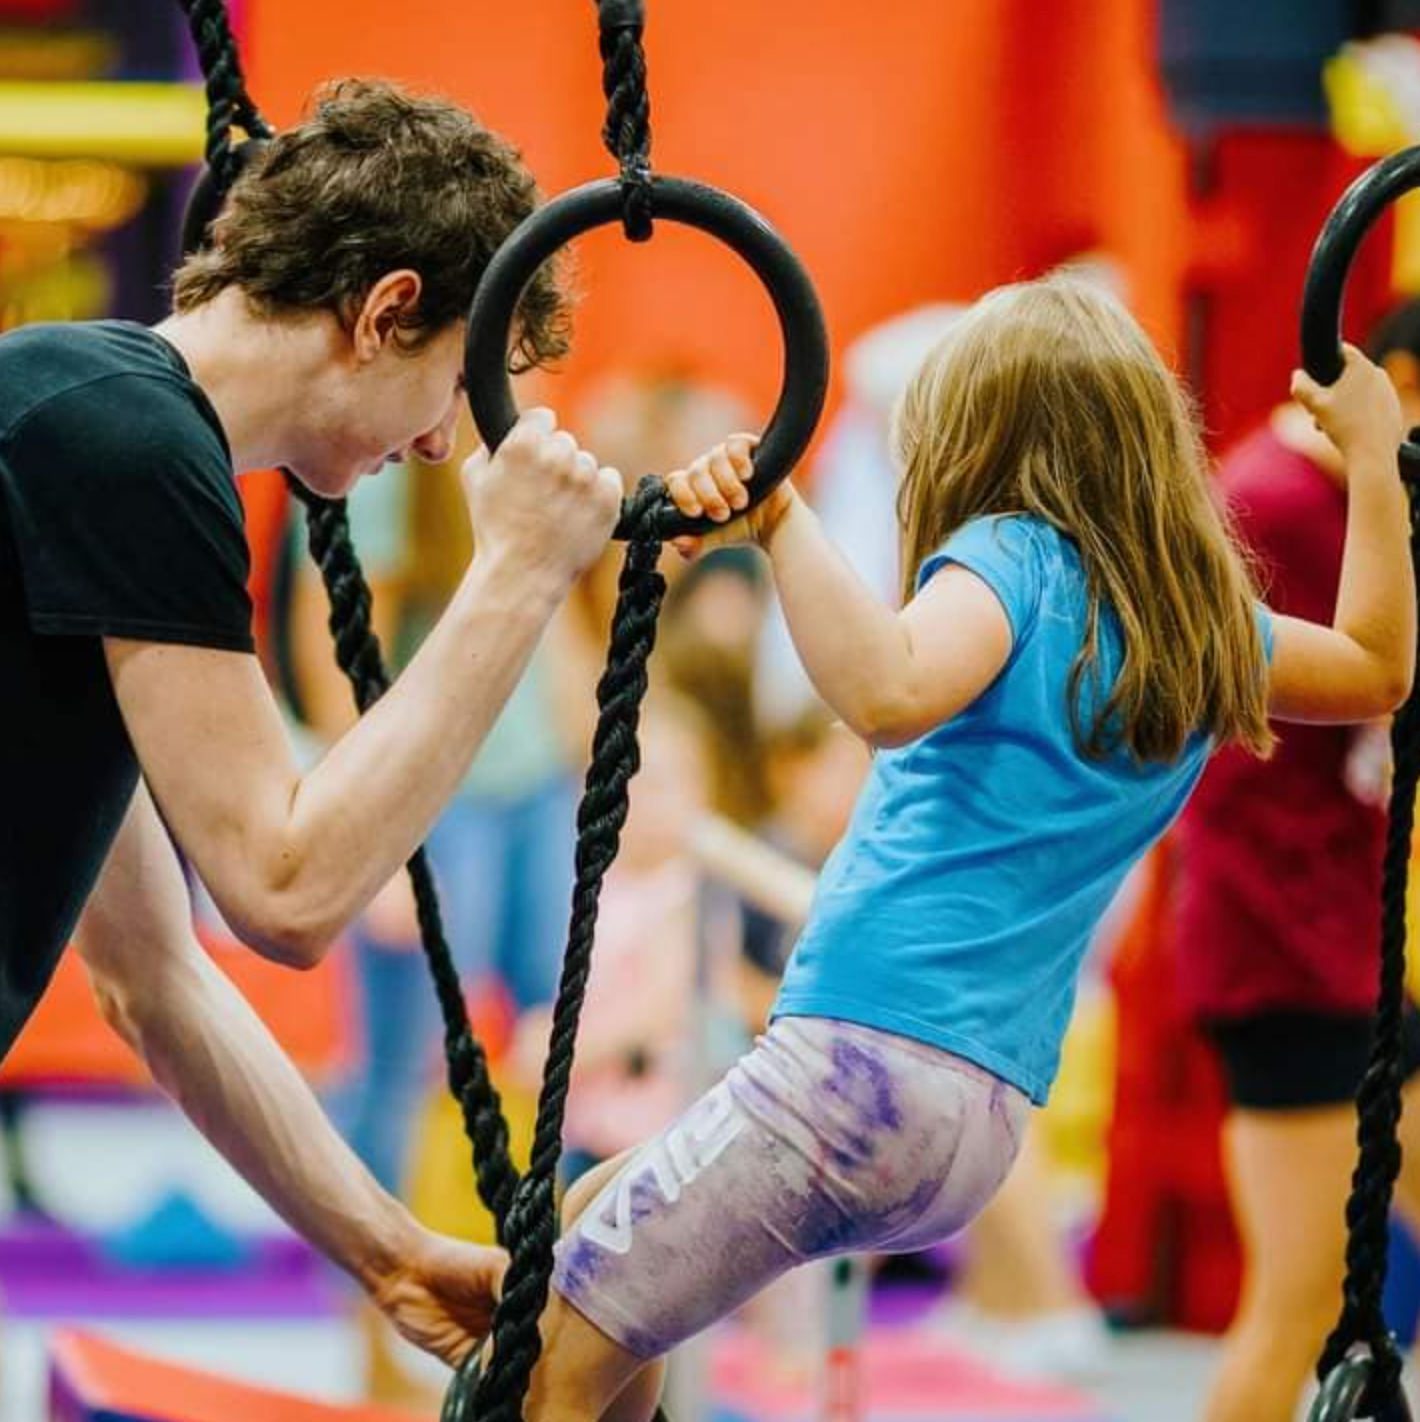 The Monkey Academy Drop In, Classes & Camps